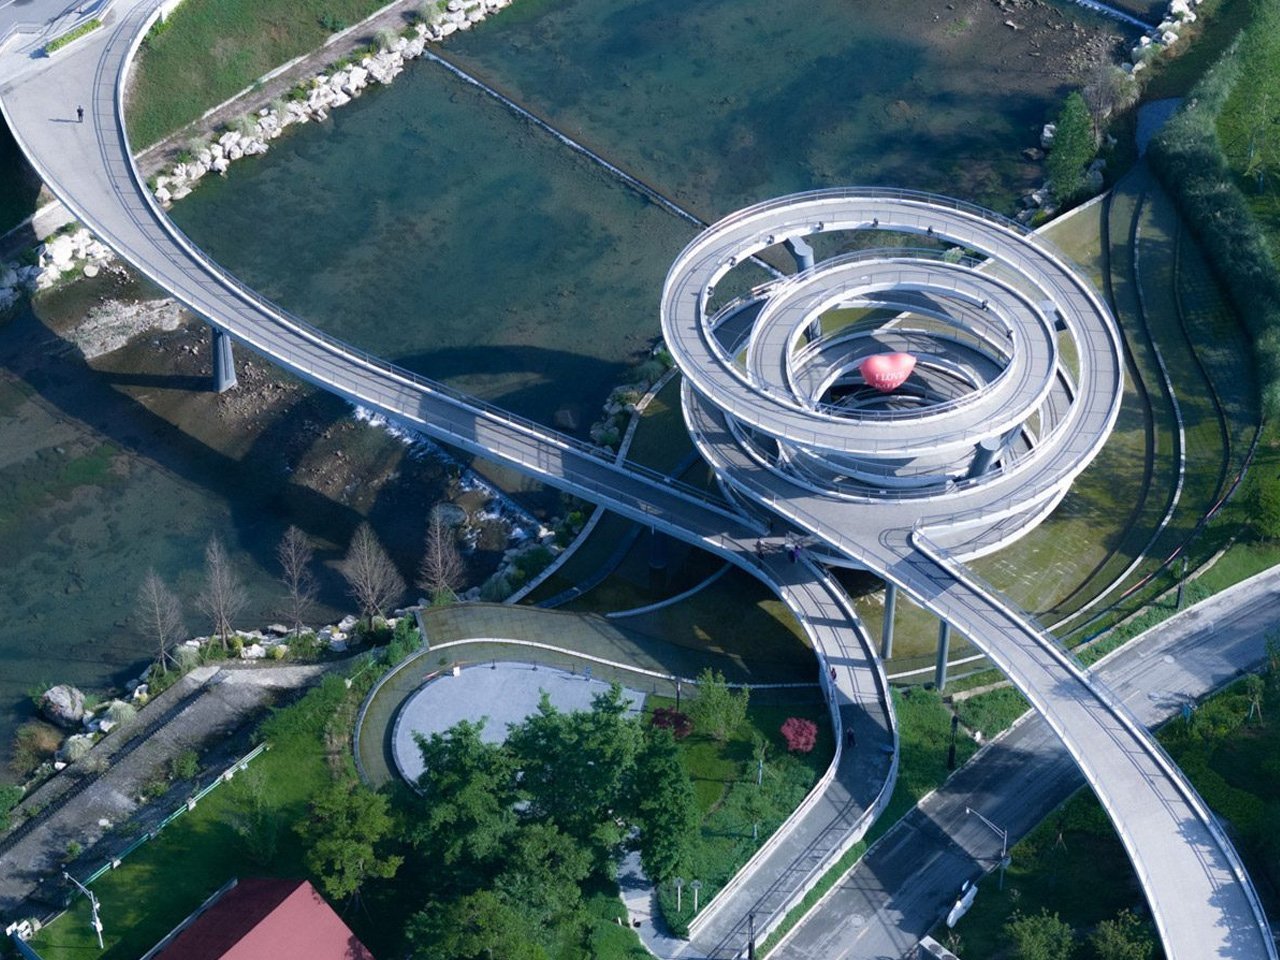 The G Clef Bridge In China Is Inspired By Musical Notation & Features A Spiralling Viewpoint